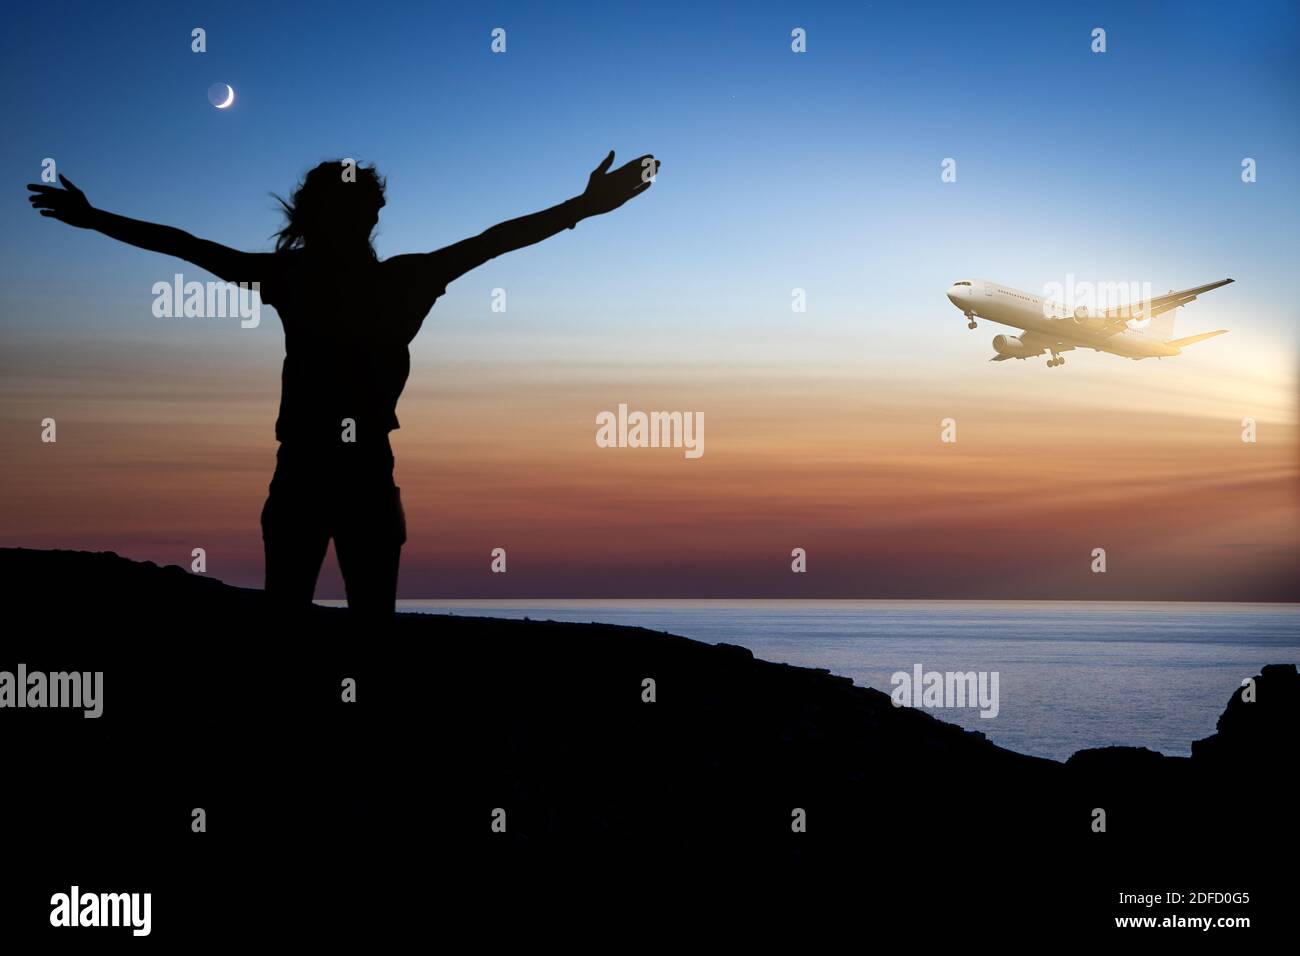 Woman on the island waving her arms to flying plane during sunset Stock Photo